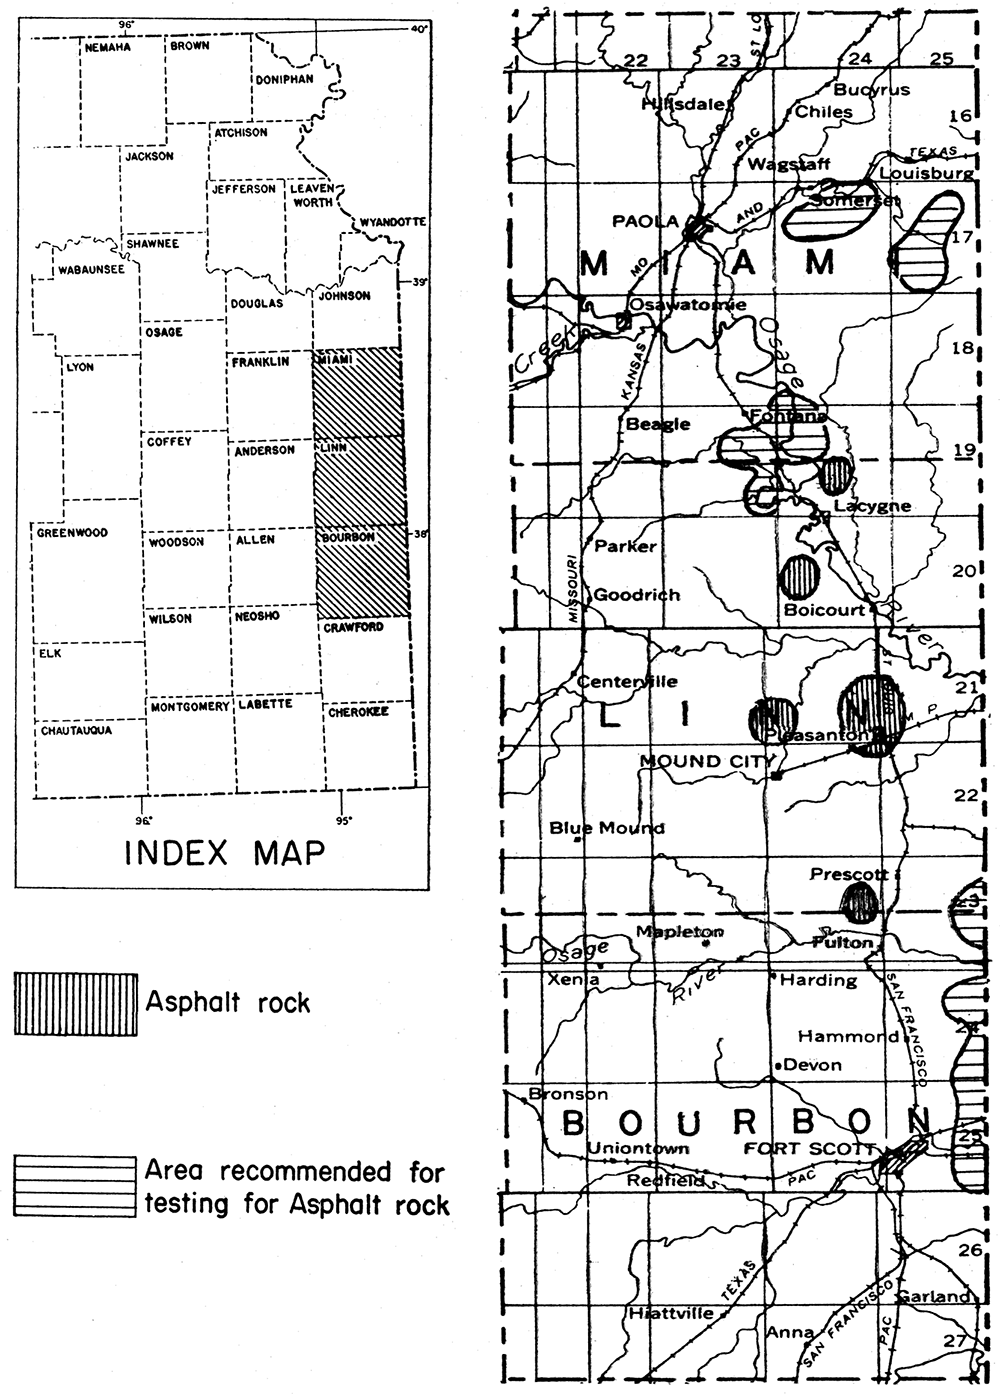 Map of the three counties showing asphalt rock deposits and areas recommended for prospecting.